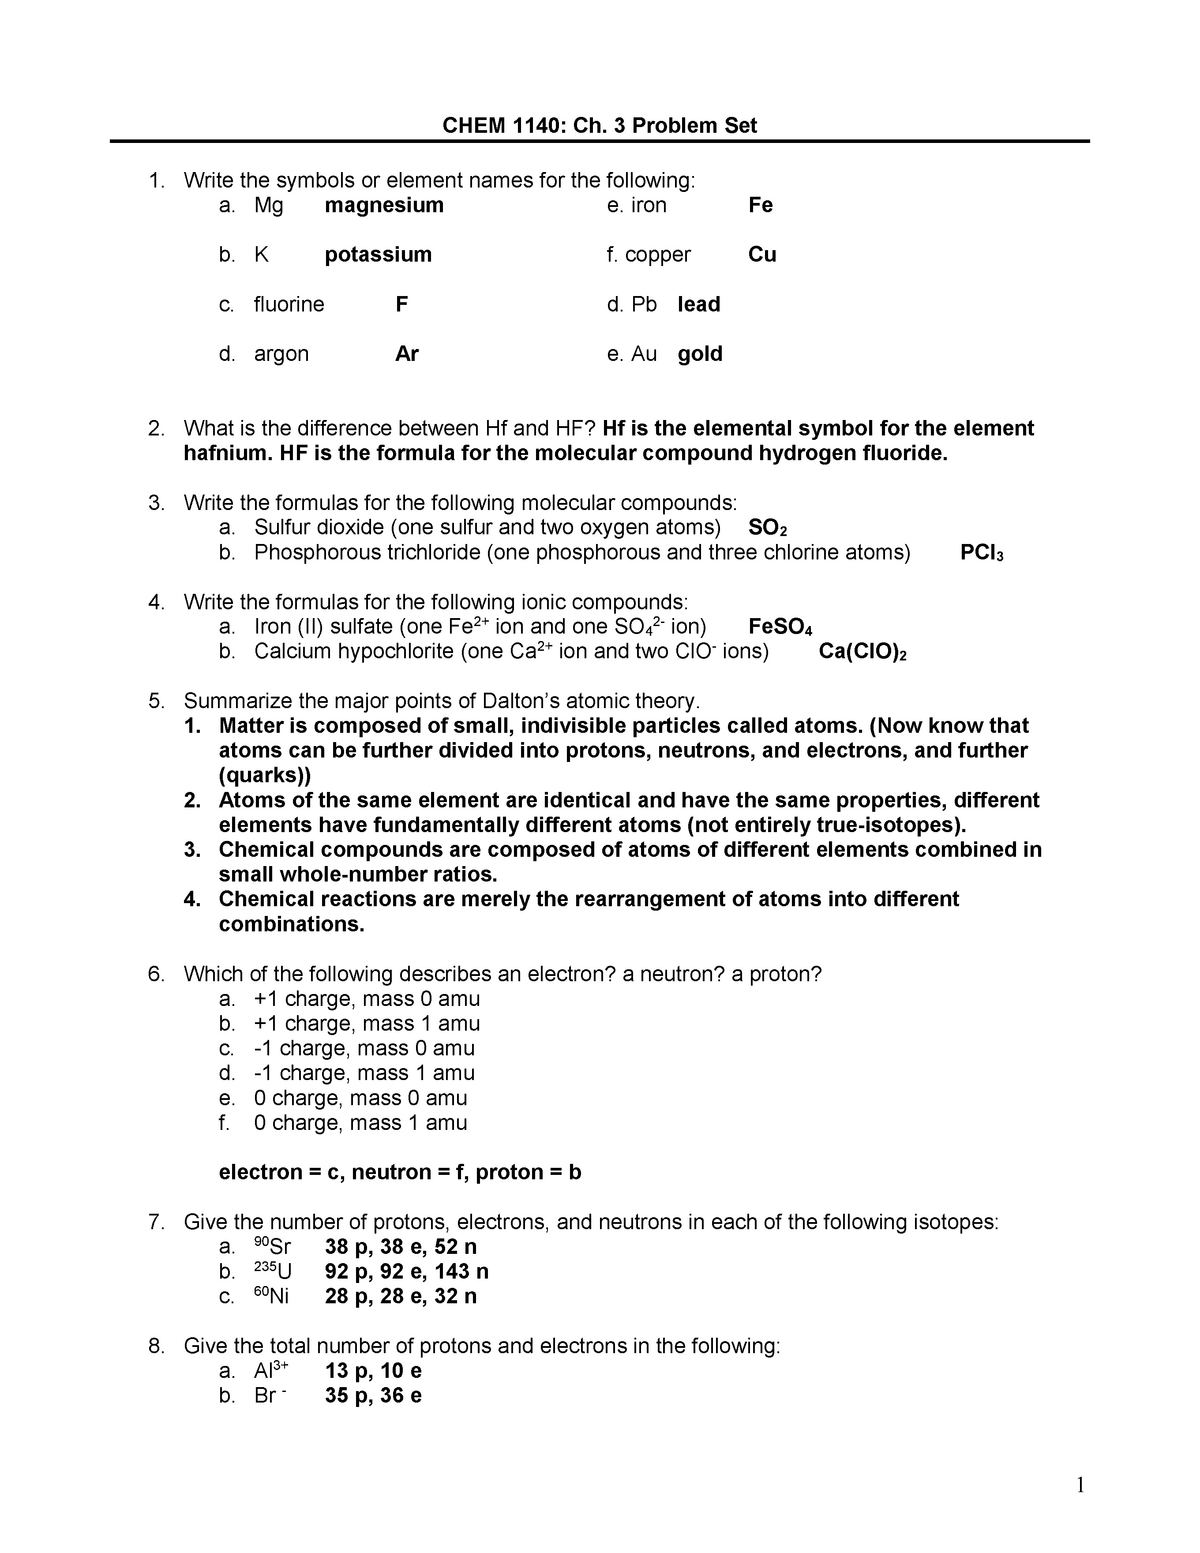 Chapter 24 - Atomic Theory Problem Set Answer - CHEM 24: Ch. 24 With Atomic Theory Worksheet Answers